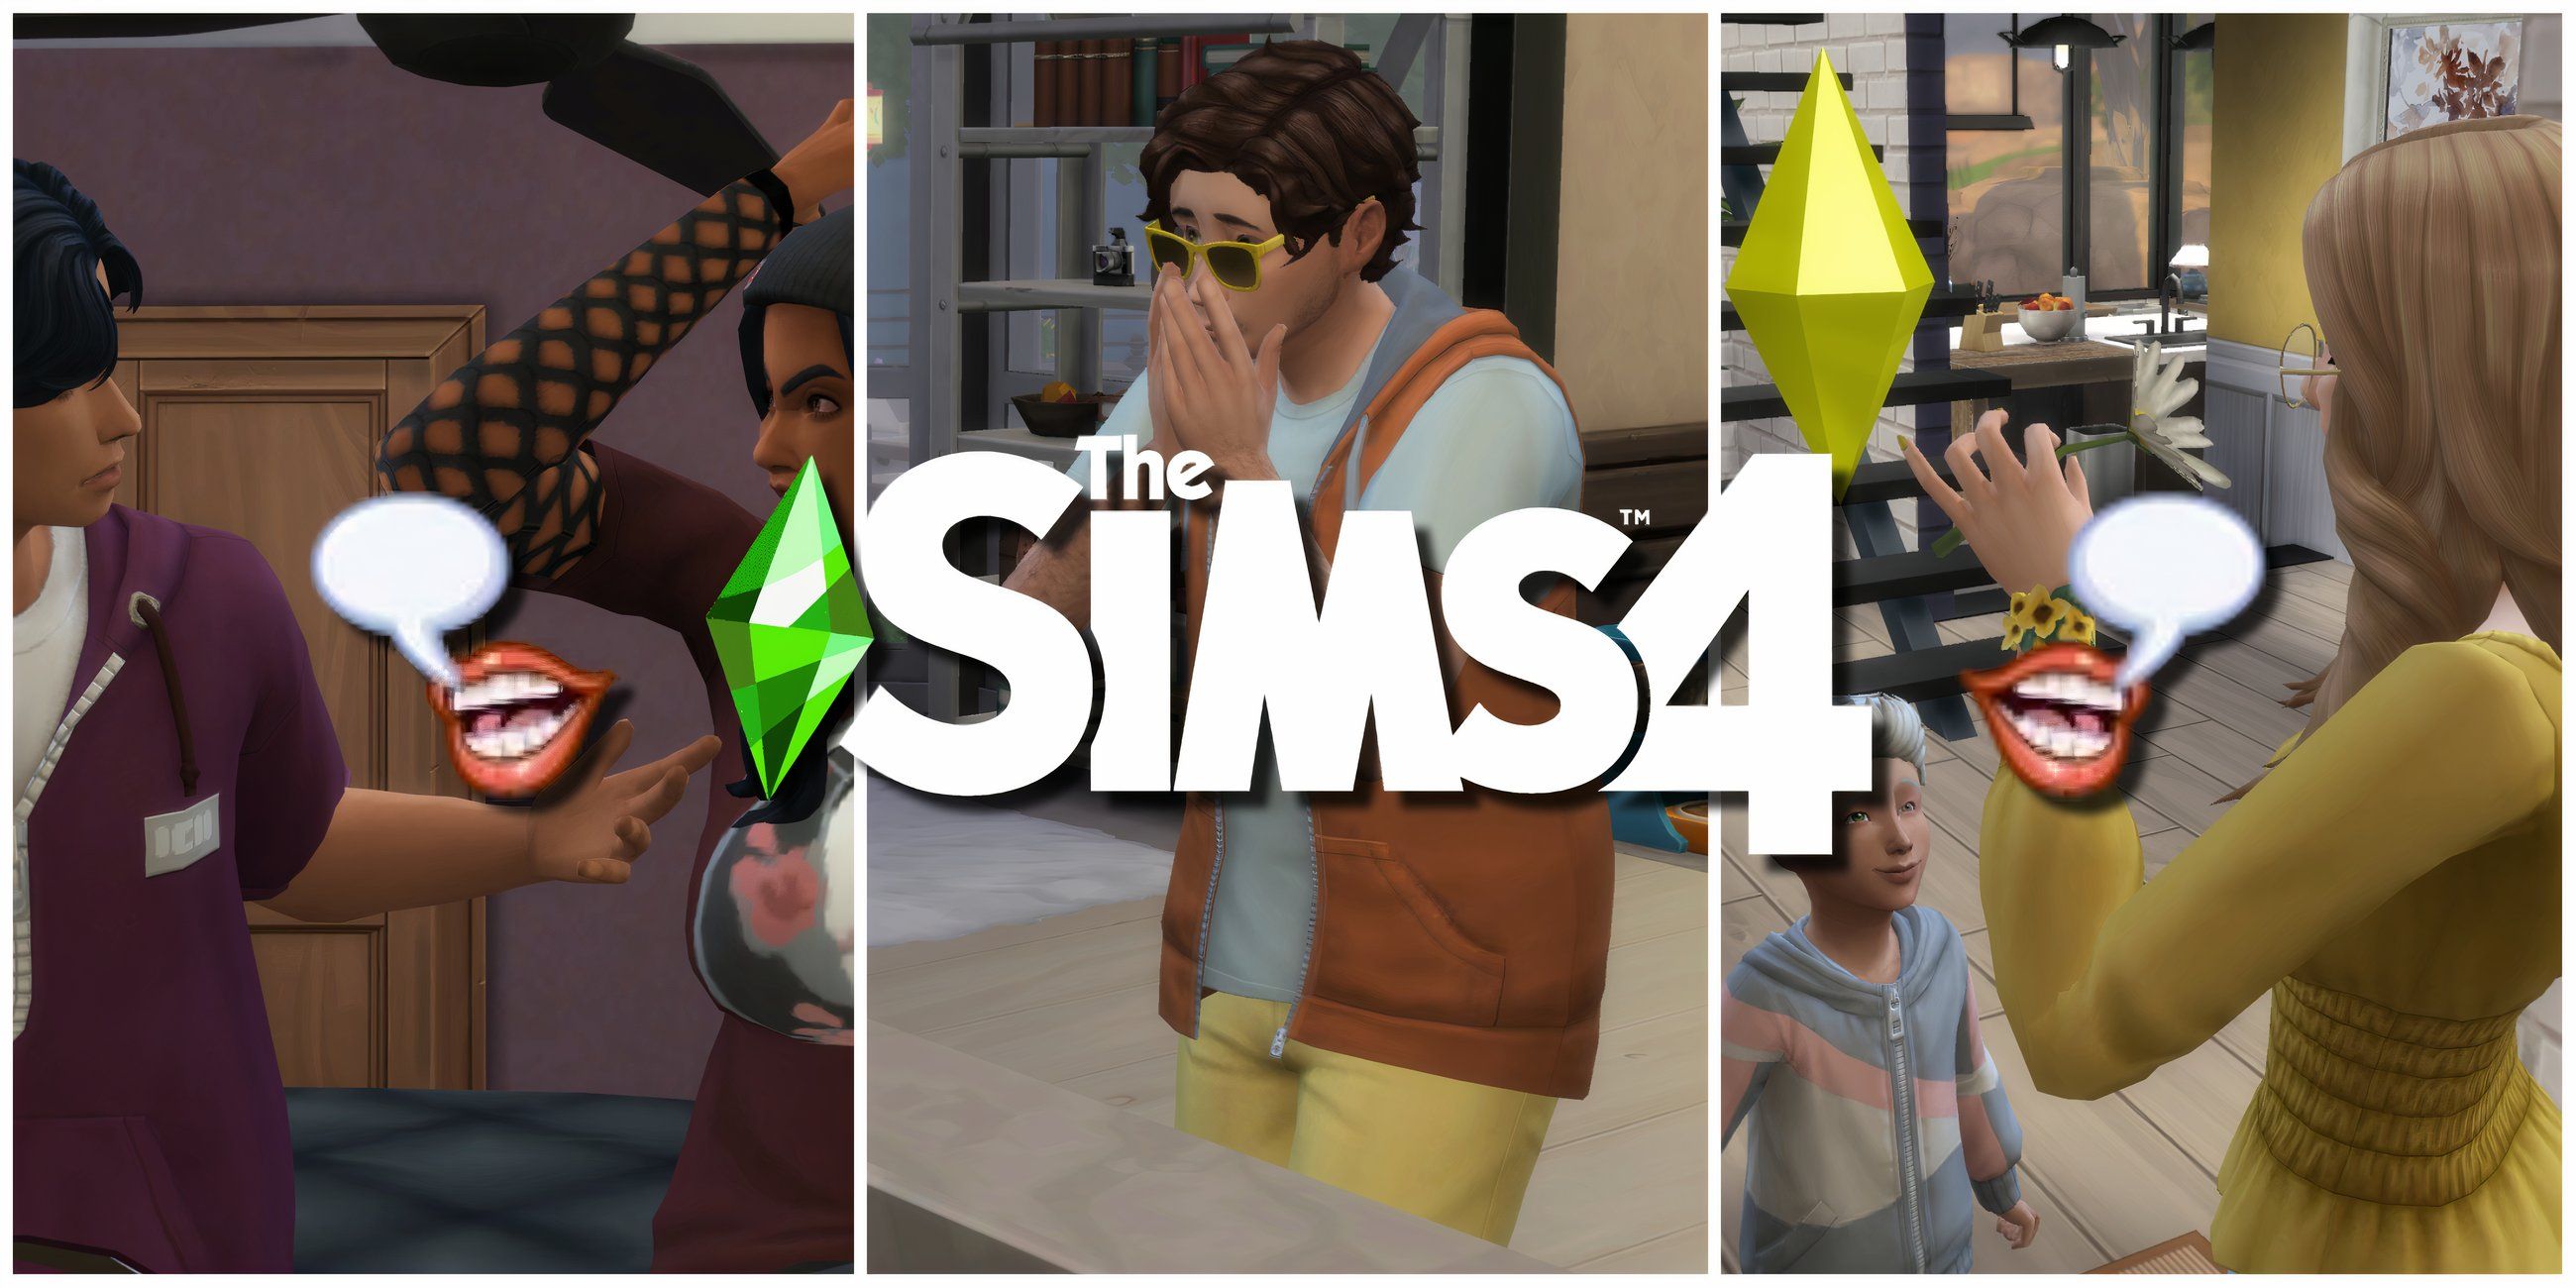 Sims in conversation, showcasing the best mods for enhancing social interactions